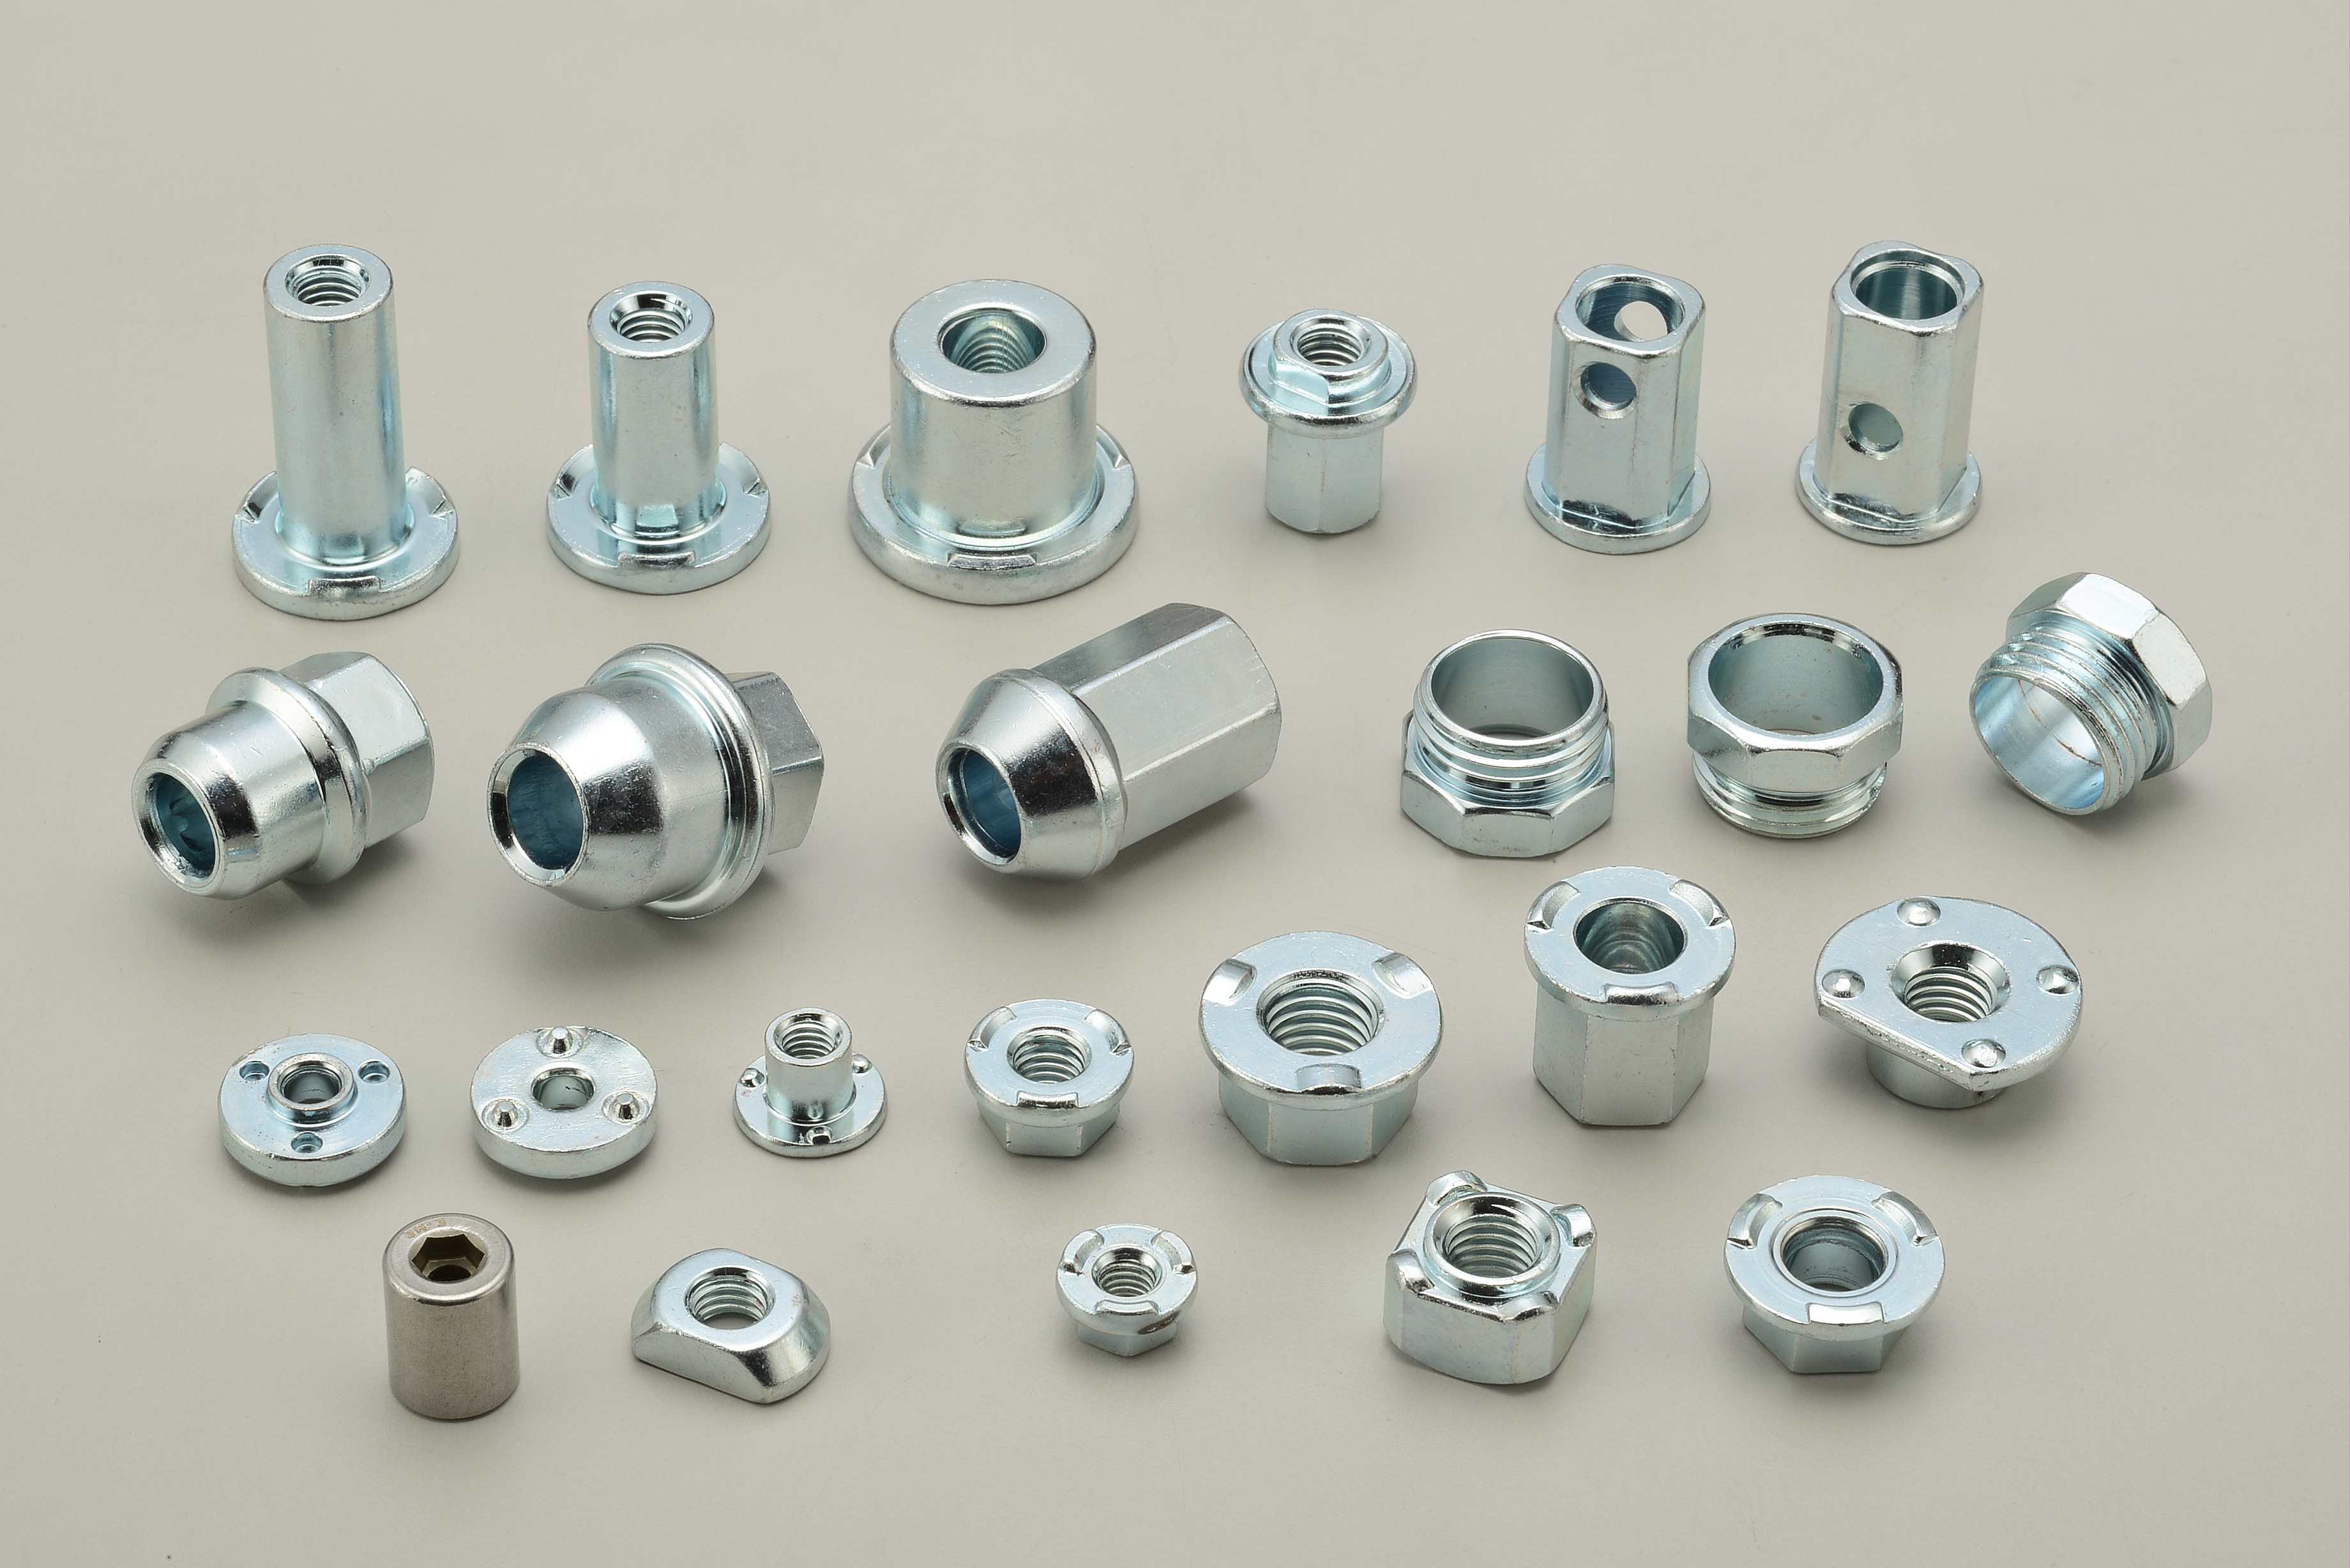 Weld Nuts And Stamped Weld Nuts Taiwan Trading Company Nuts And Bolts ...